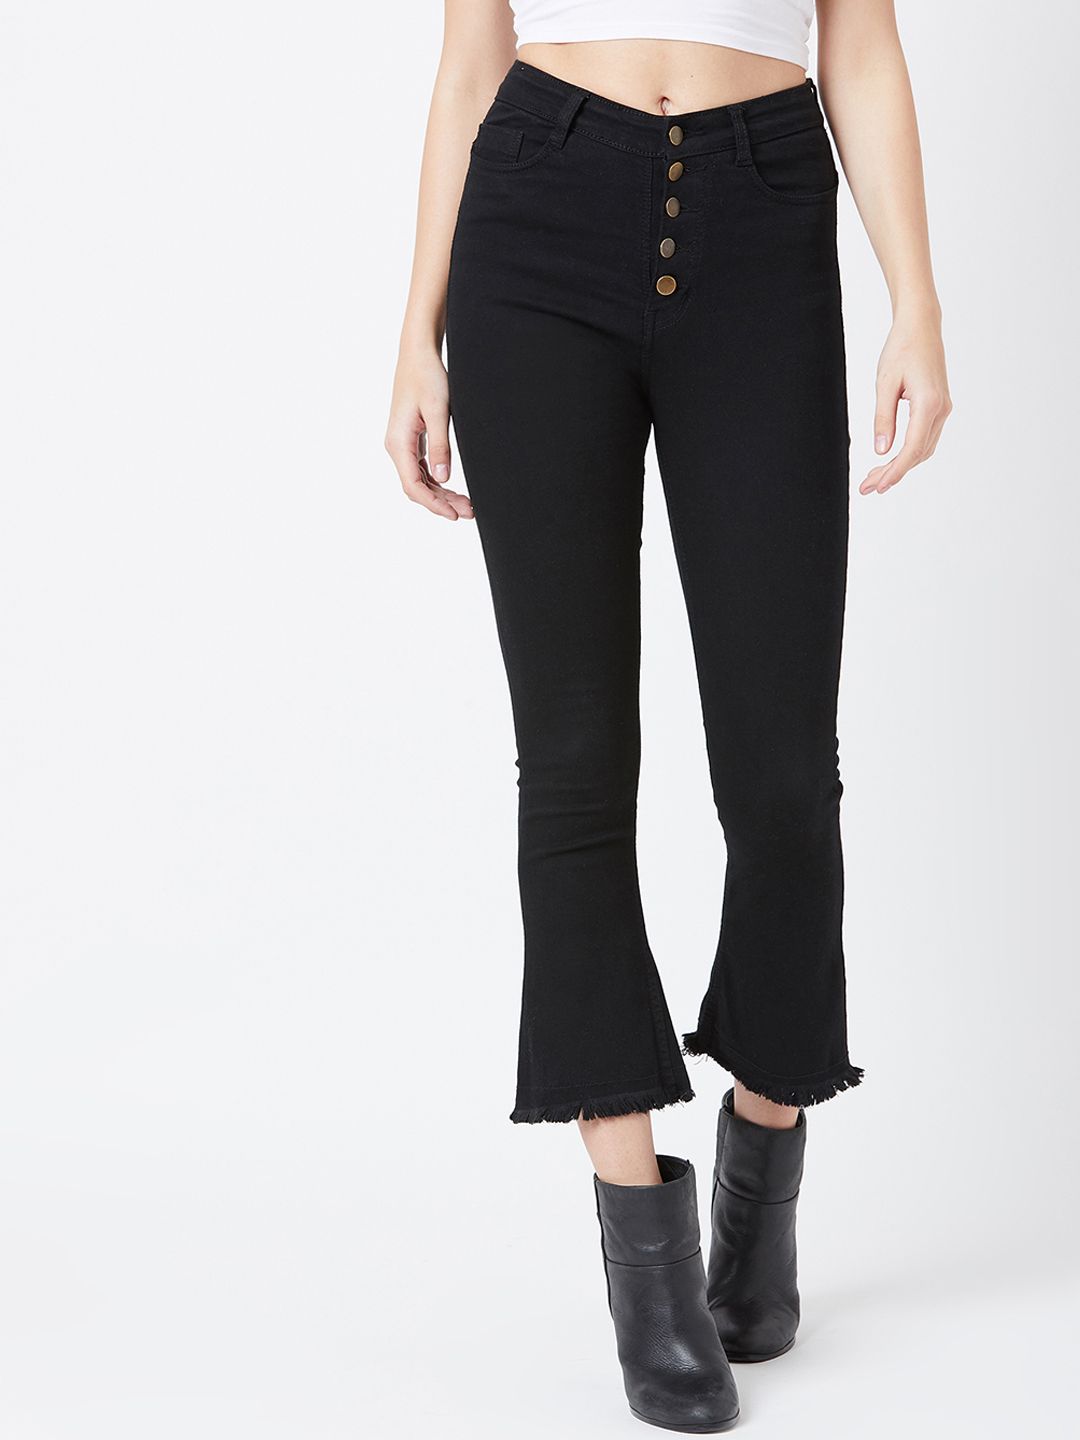 The Dry State Women Black Bootcut High-Rise Clean Look Jeans Price in India